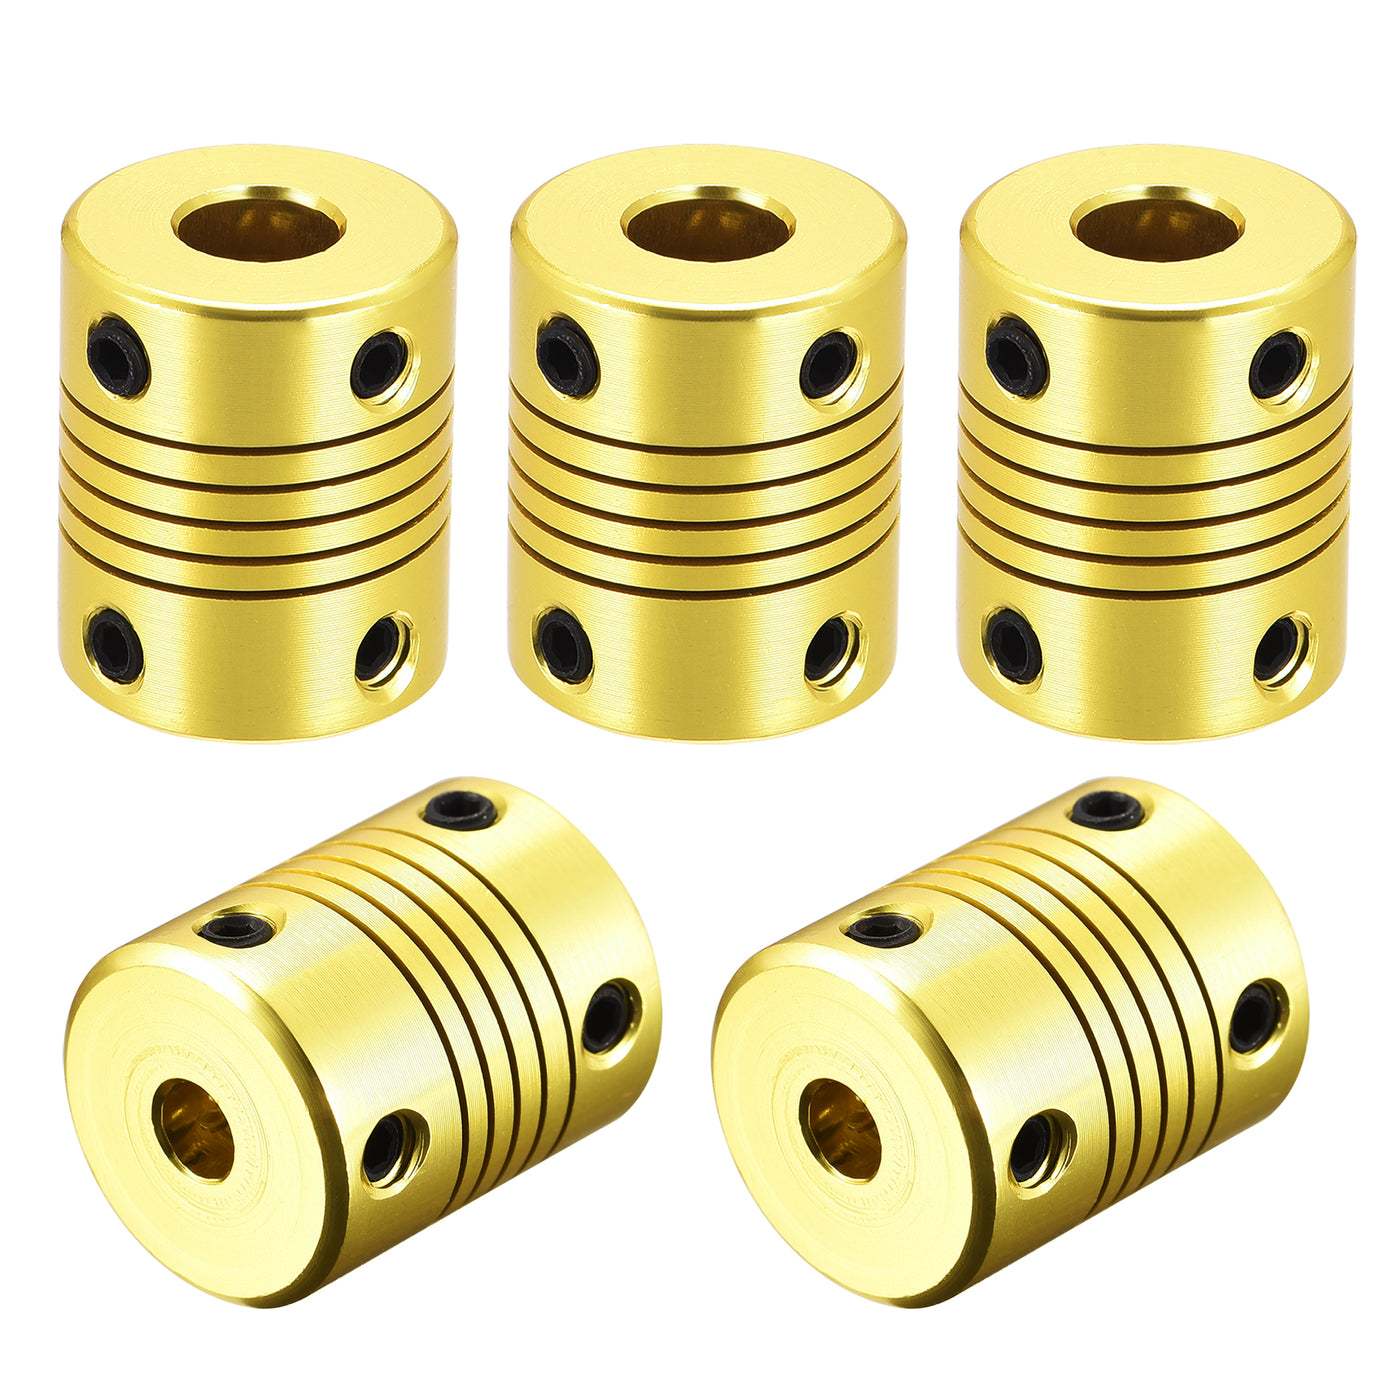 uxcell Uxcell 5 Pcs 8mm to 5mm Aluminum Alloy Shaft Coupling Flexible L25xD20 Golden Tone